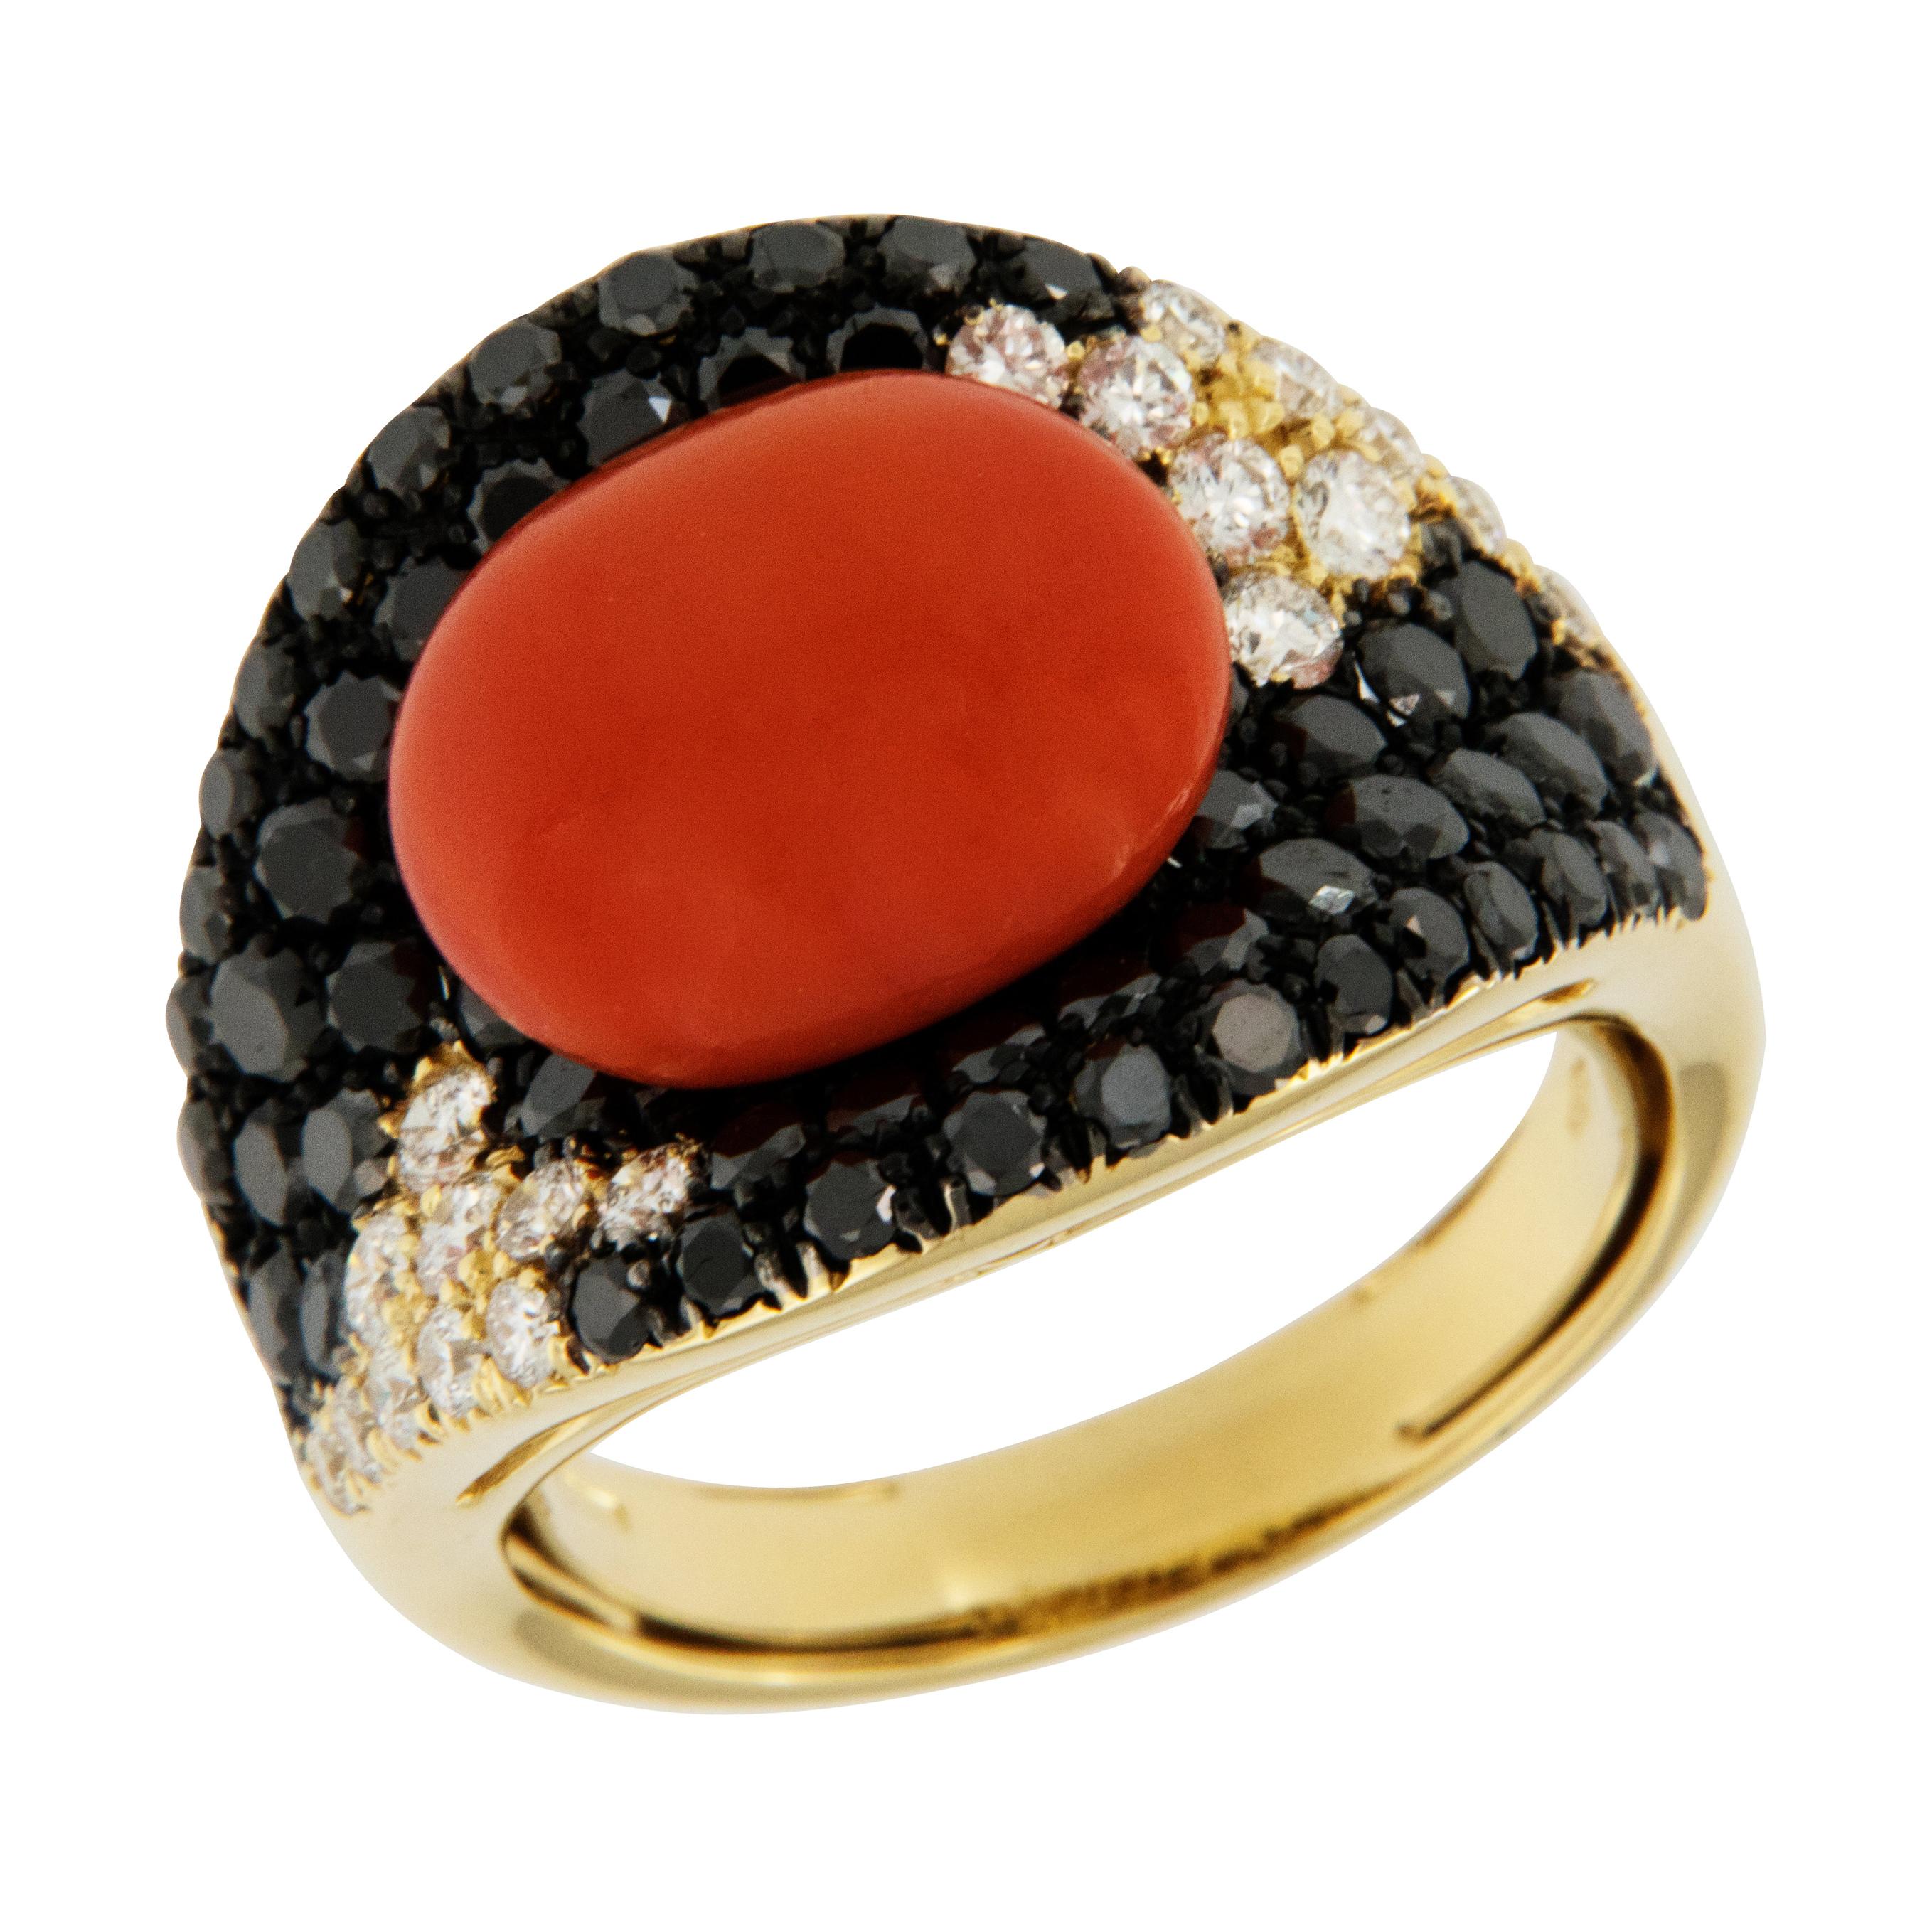 Coral Set with Black/White Diamonds 18 Karat Yellow Gold Ring Made in Italy